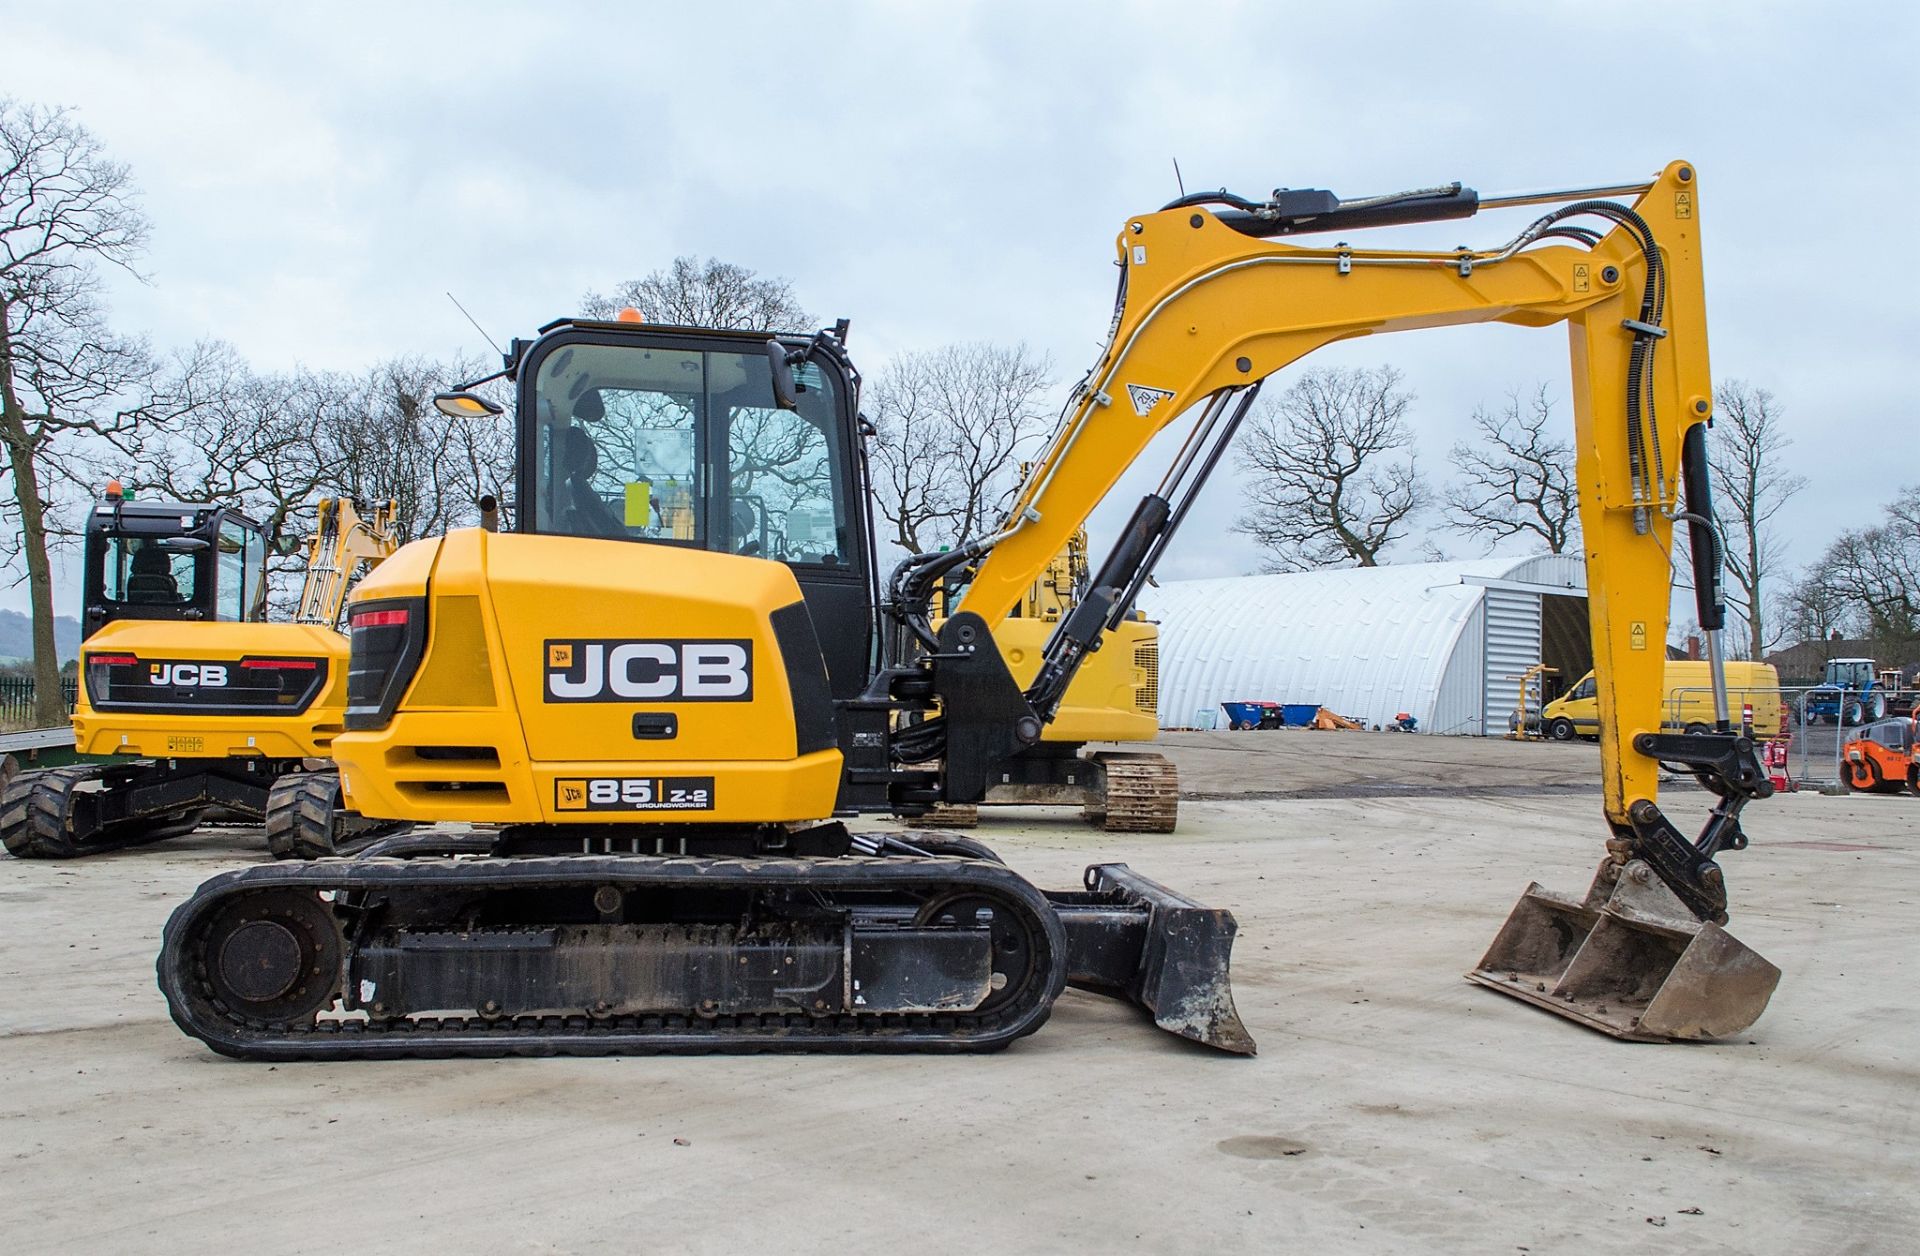 JCB 85 Z-2 Groundworker 8.5 tonne rubber tracked excavator Year: 2020 S/N: 2735672 Recorded Hours: - Image 8 of 30